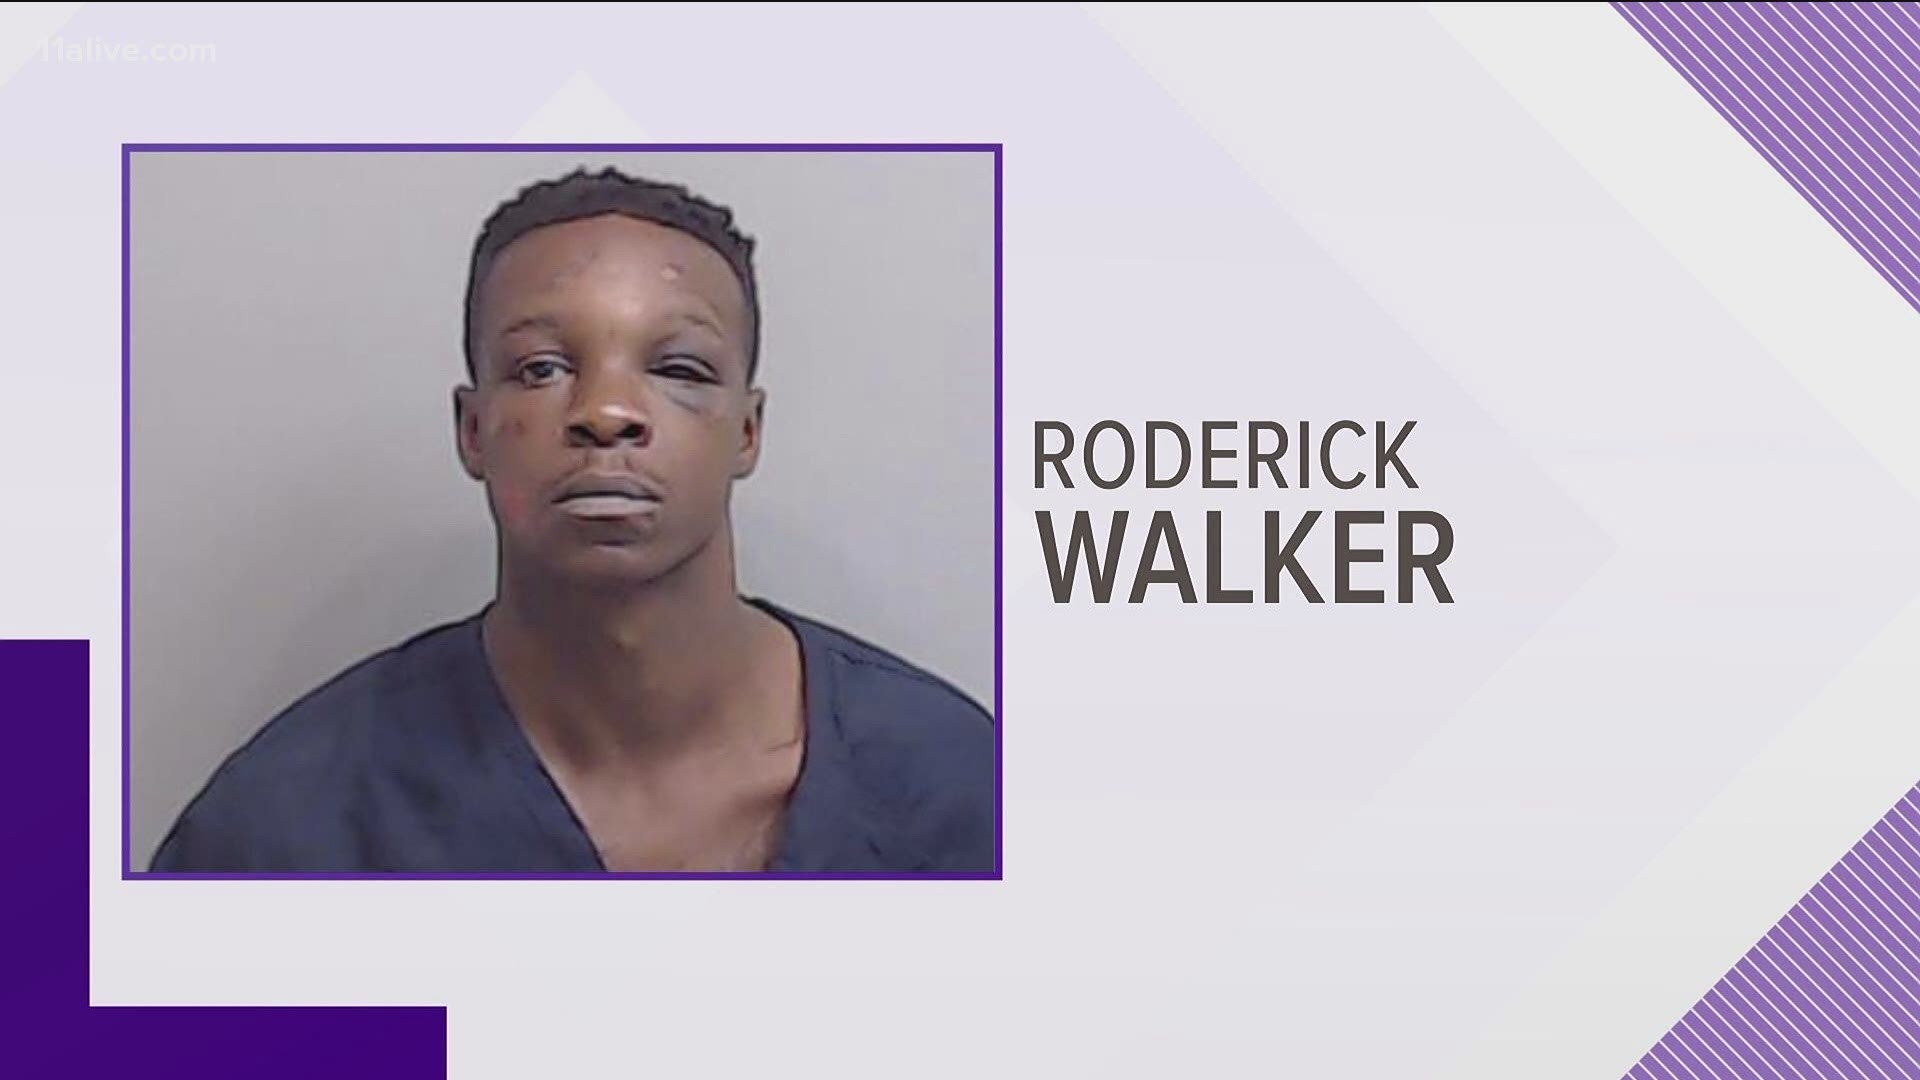 Roderick Walker's attorney says he's not getting any additional information from the sheriff.